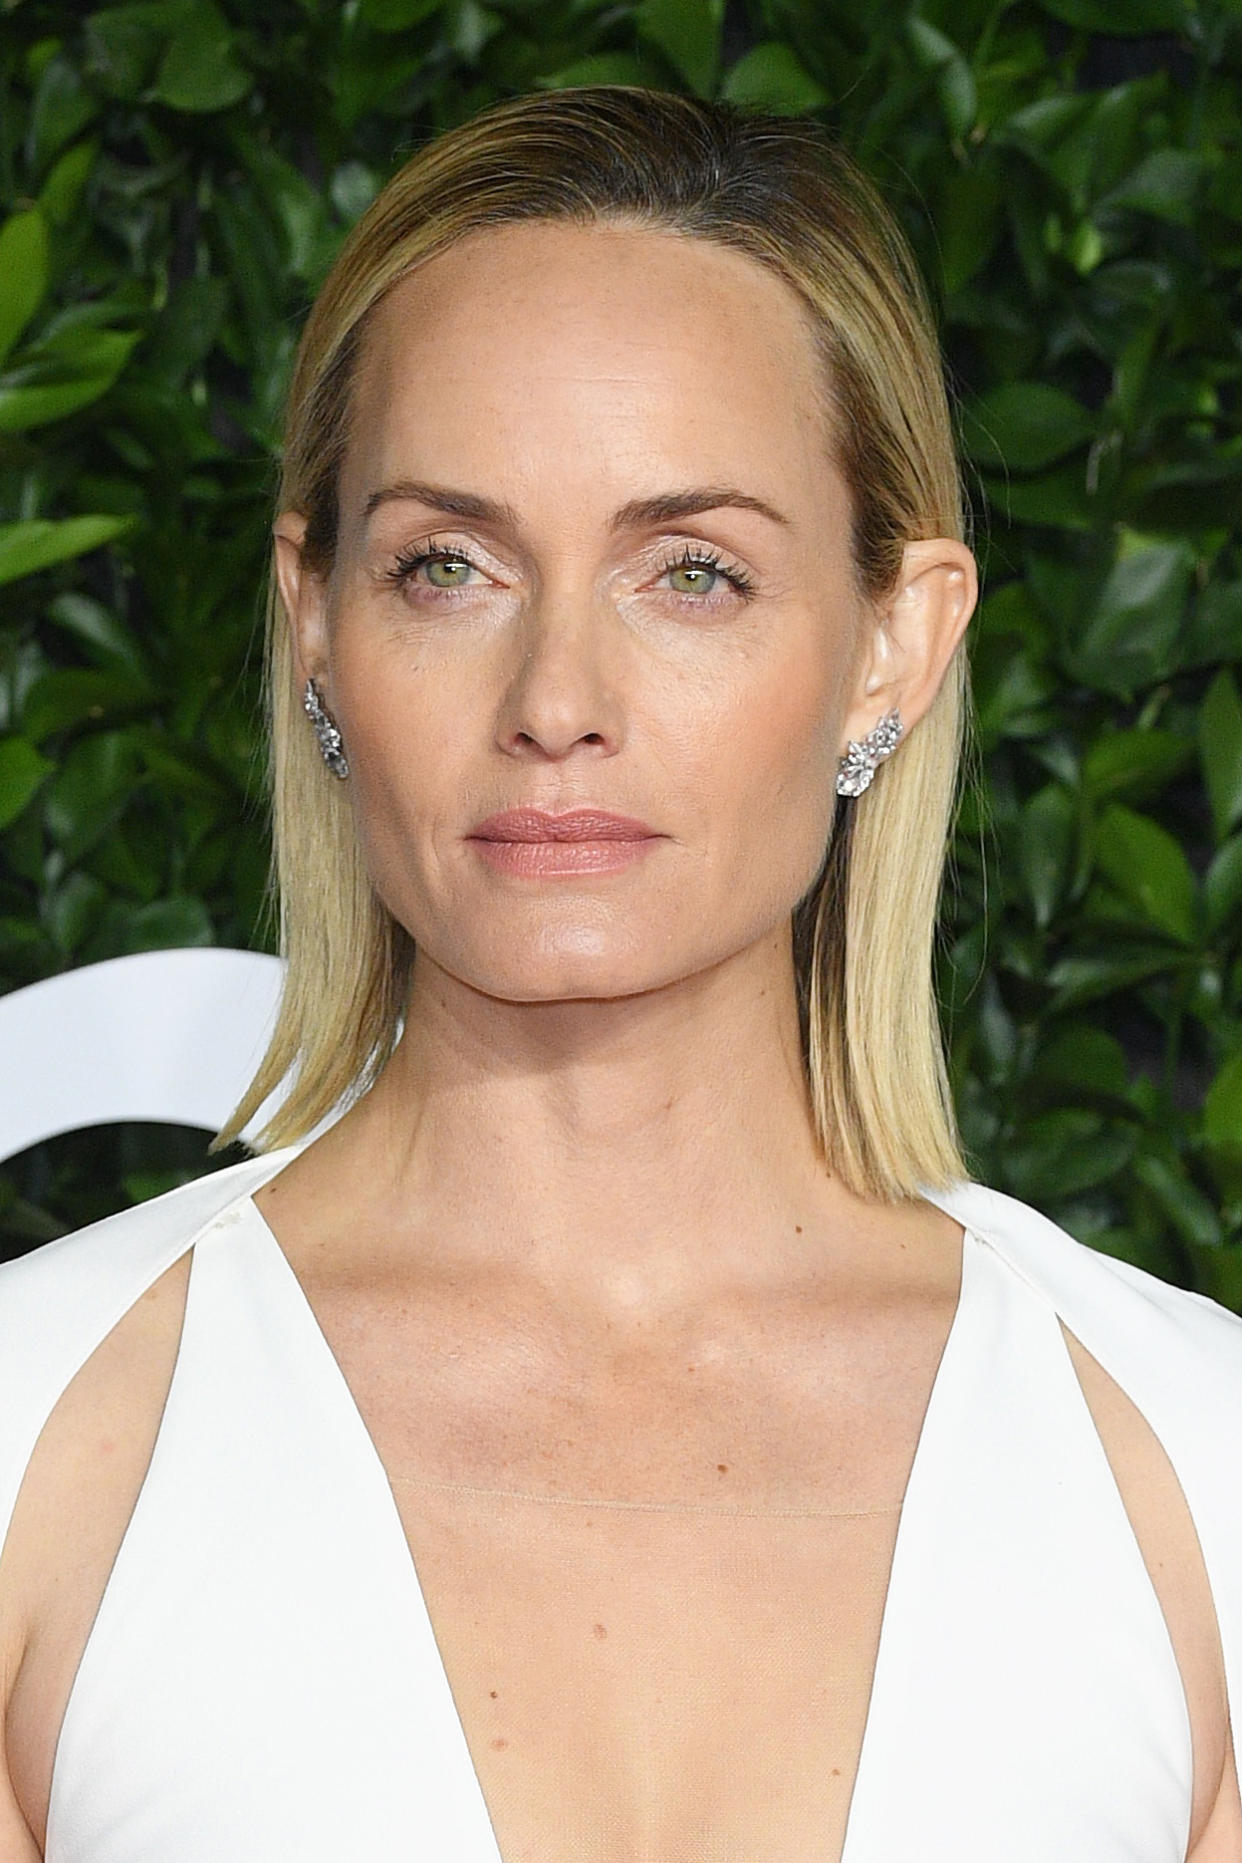 Model Amber Valletta, at the Fashion Awards in December, believes that if she didn't get sober 25 years ago, she wouldn't be alive. (Photo: Daniele Venturelli/Daniele Venturelli/WireImage )